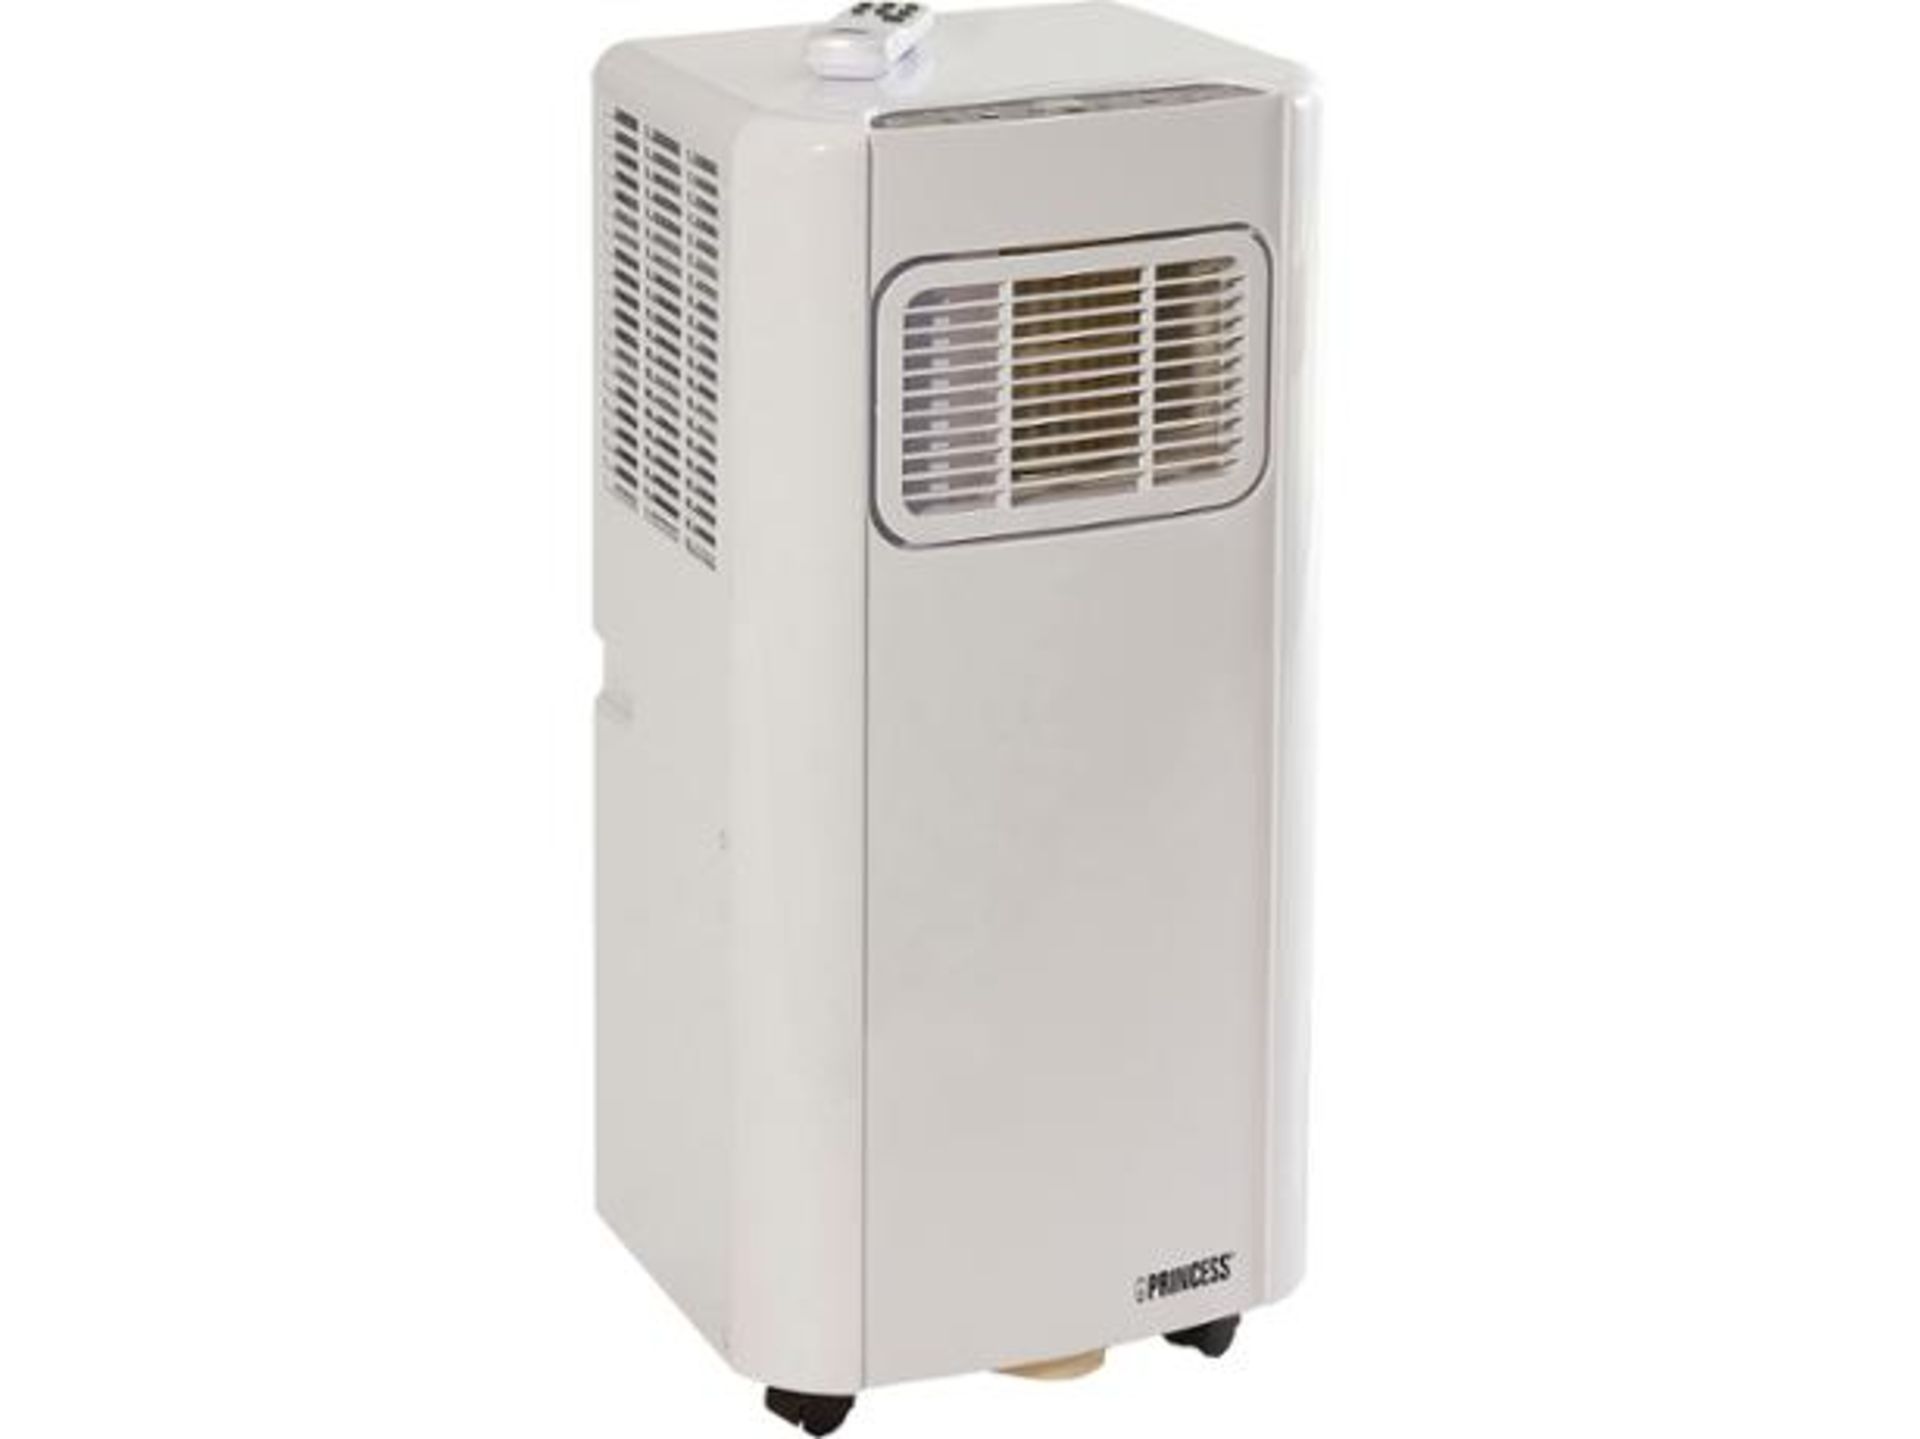 PALLET TO CONTAIN 4 x PRINCESS WHITE AIR CONDITIONER 9000 BTU. RRP £399.99 EACH. 1000 Watt mobile - Image 3 of 3